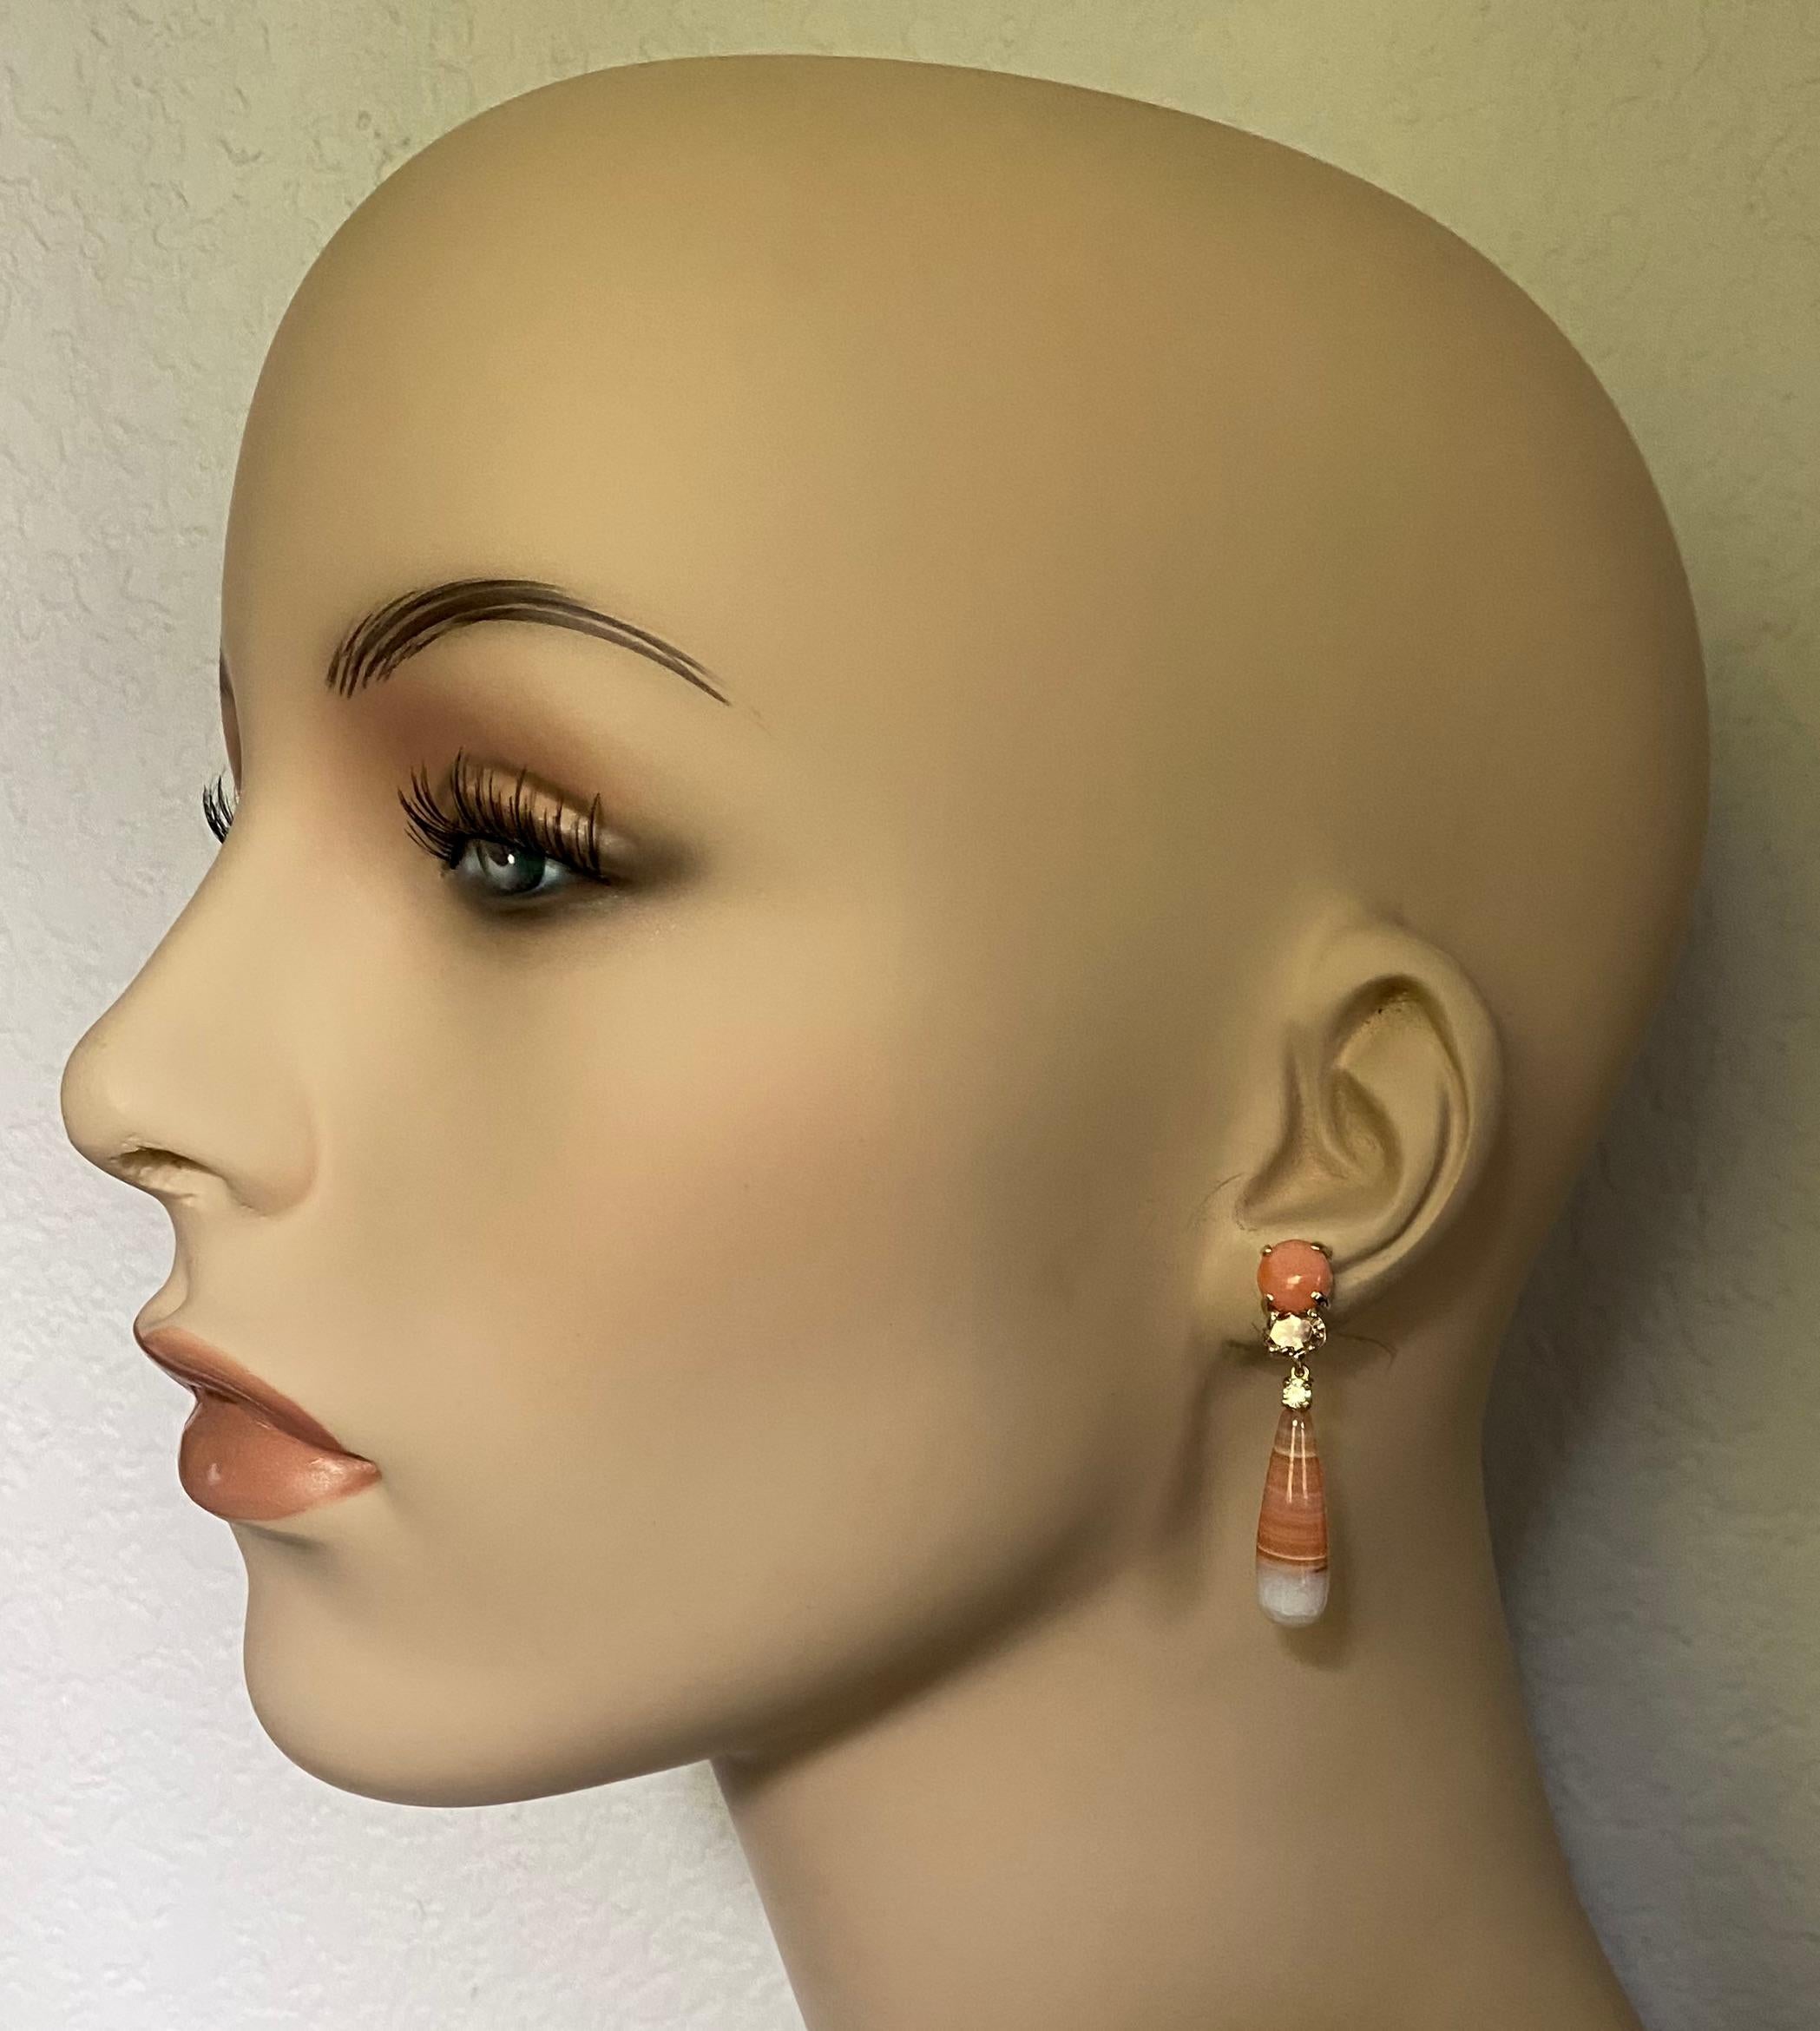 Angel skin coral, Morganite, diamond and banded chalcedony agate form these delicate dangle earrings.  The coral (origin: Japan) is a rich peach color with a glass-like polish.  The Morganite (origin: Brazil) is the peach version of the larger beryl